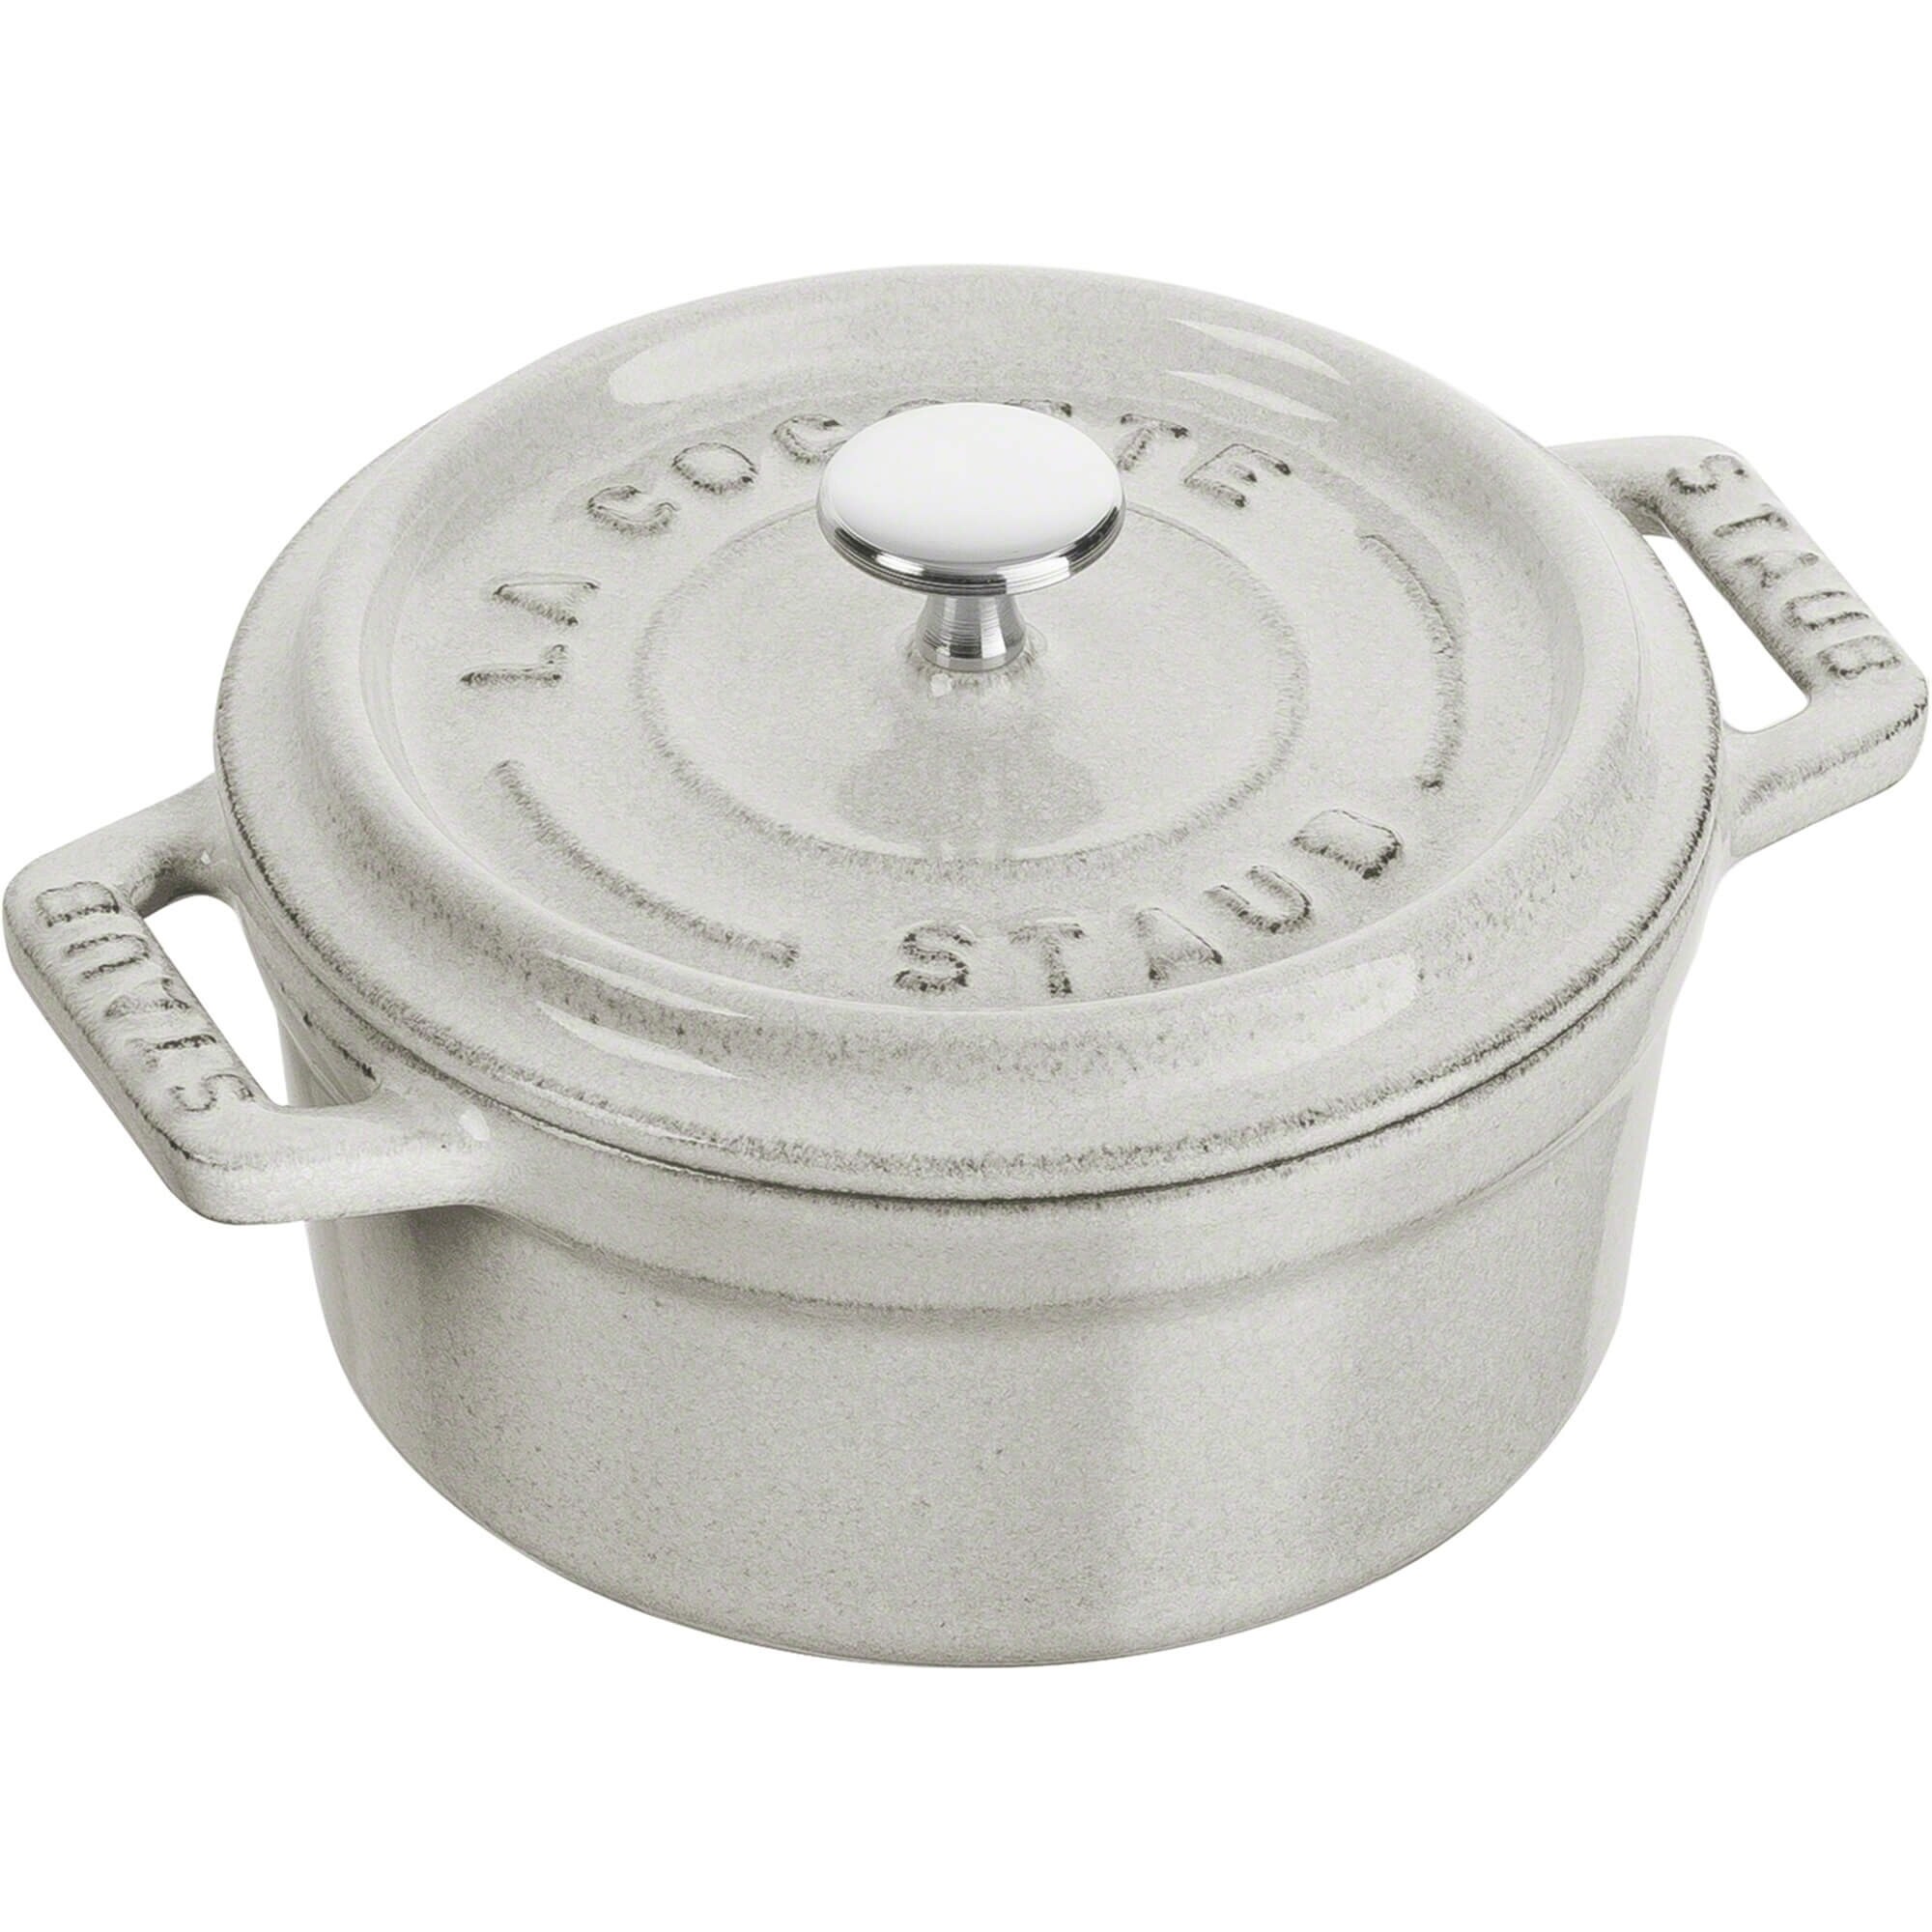 https://ak1.ostkcdn.com/images/products/is/images/direct/d32bf7b19cd6c4c8da7070e294c368e62d992f19/STAUB-Cast-Iron-0.25-qt-Mini-Round-Cocotte.jpg